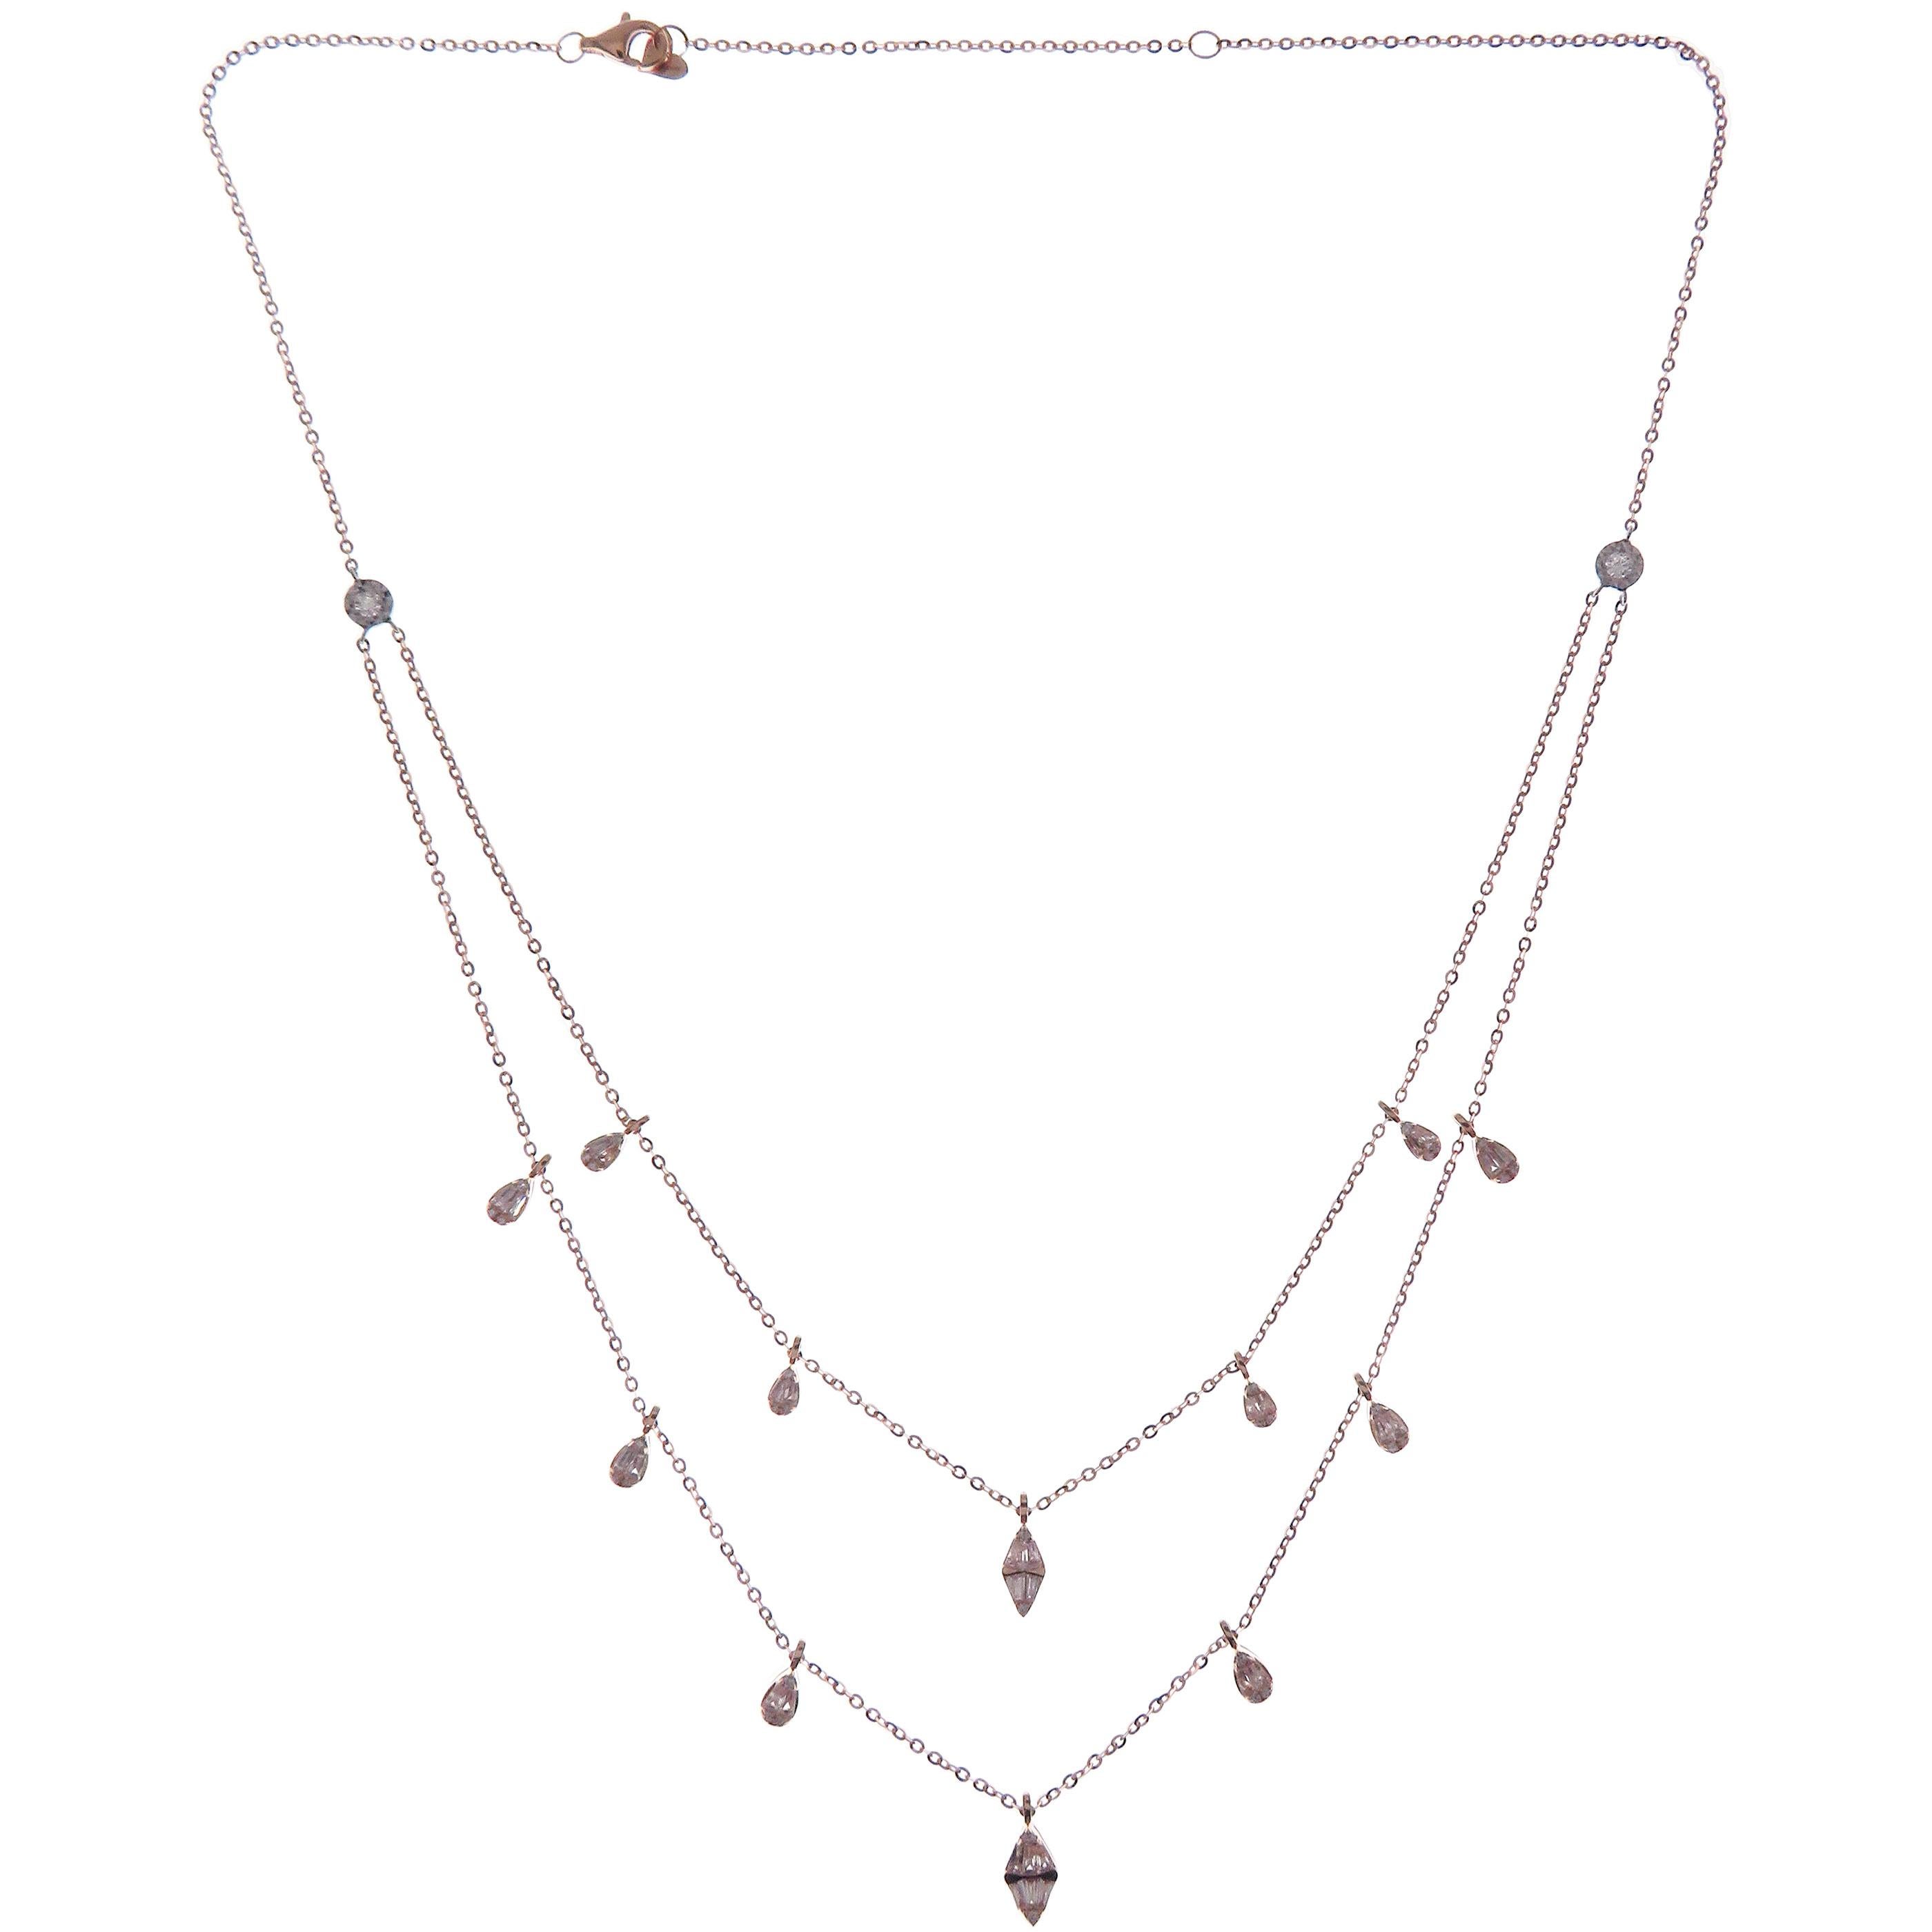 This delicate double-strand necklace is crafted in 18-karat yellow gold, weighing approximately 1.06 total carats of SI-H Quality white diamonds. 
18-karat white gold and rose gold are also available upon request.

Necklace is 16